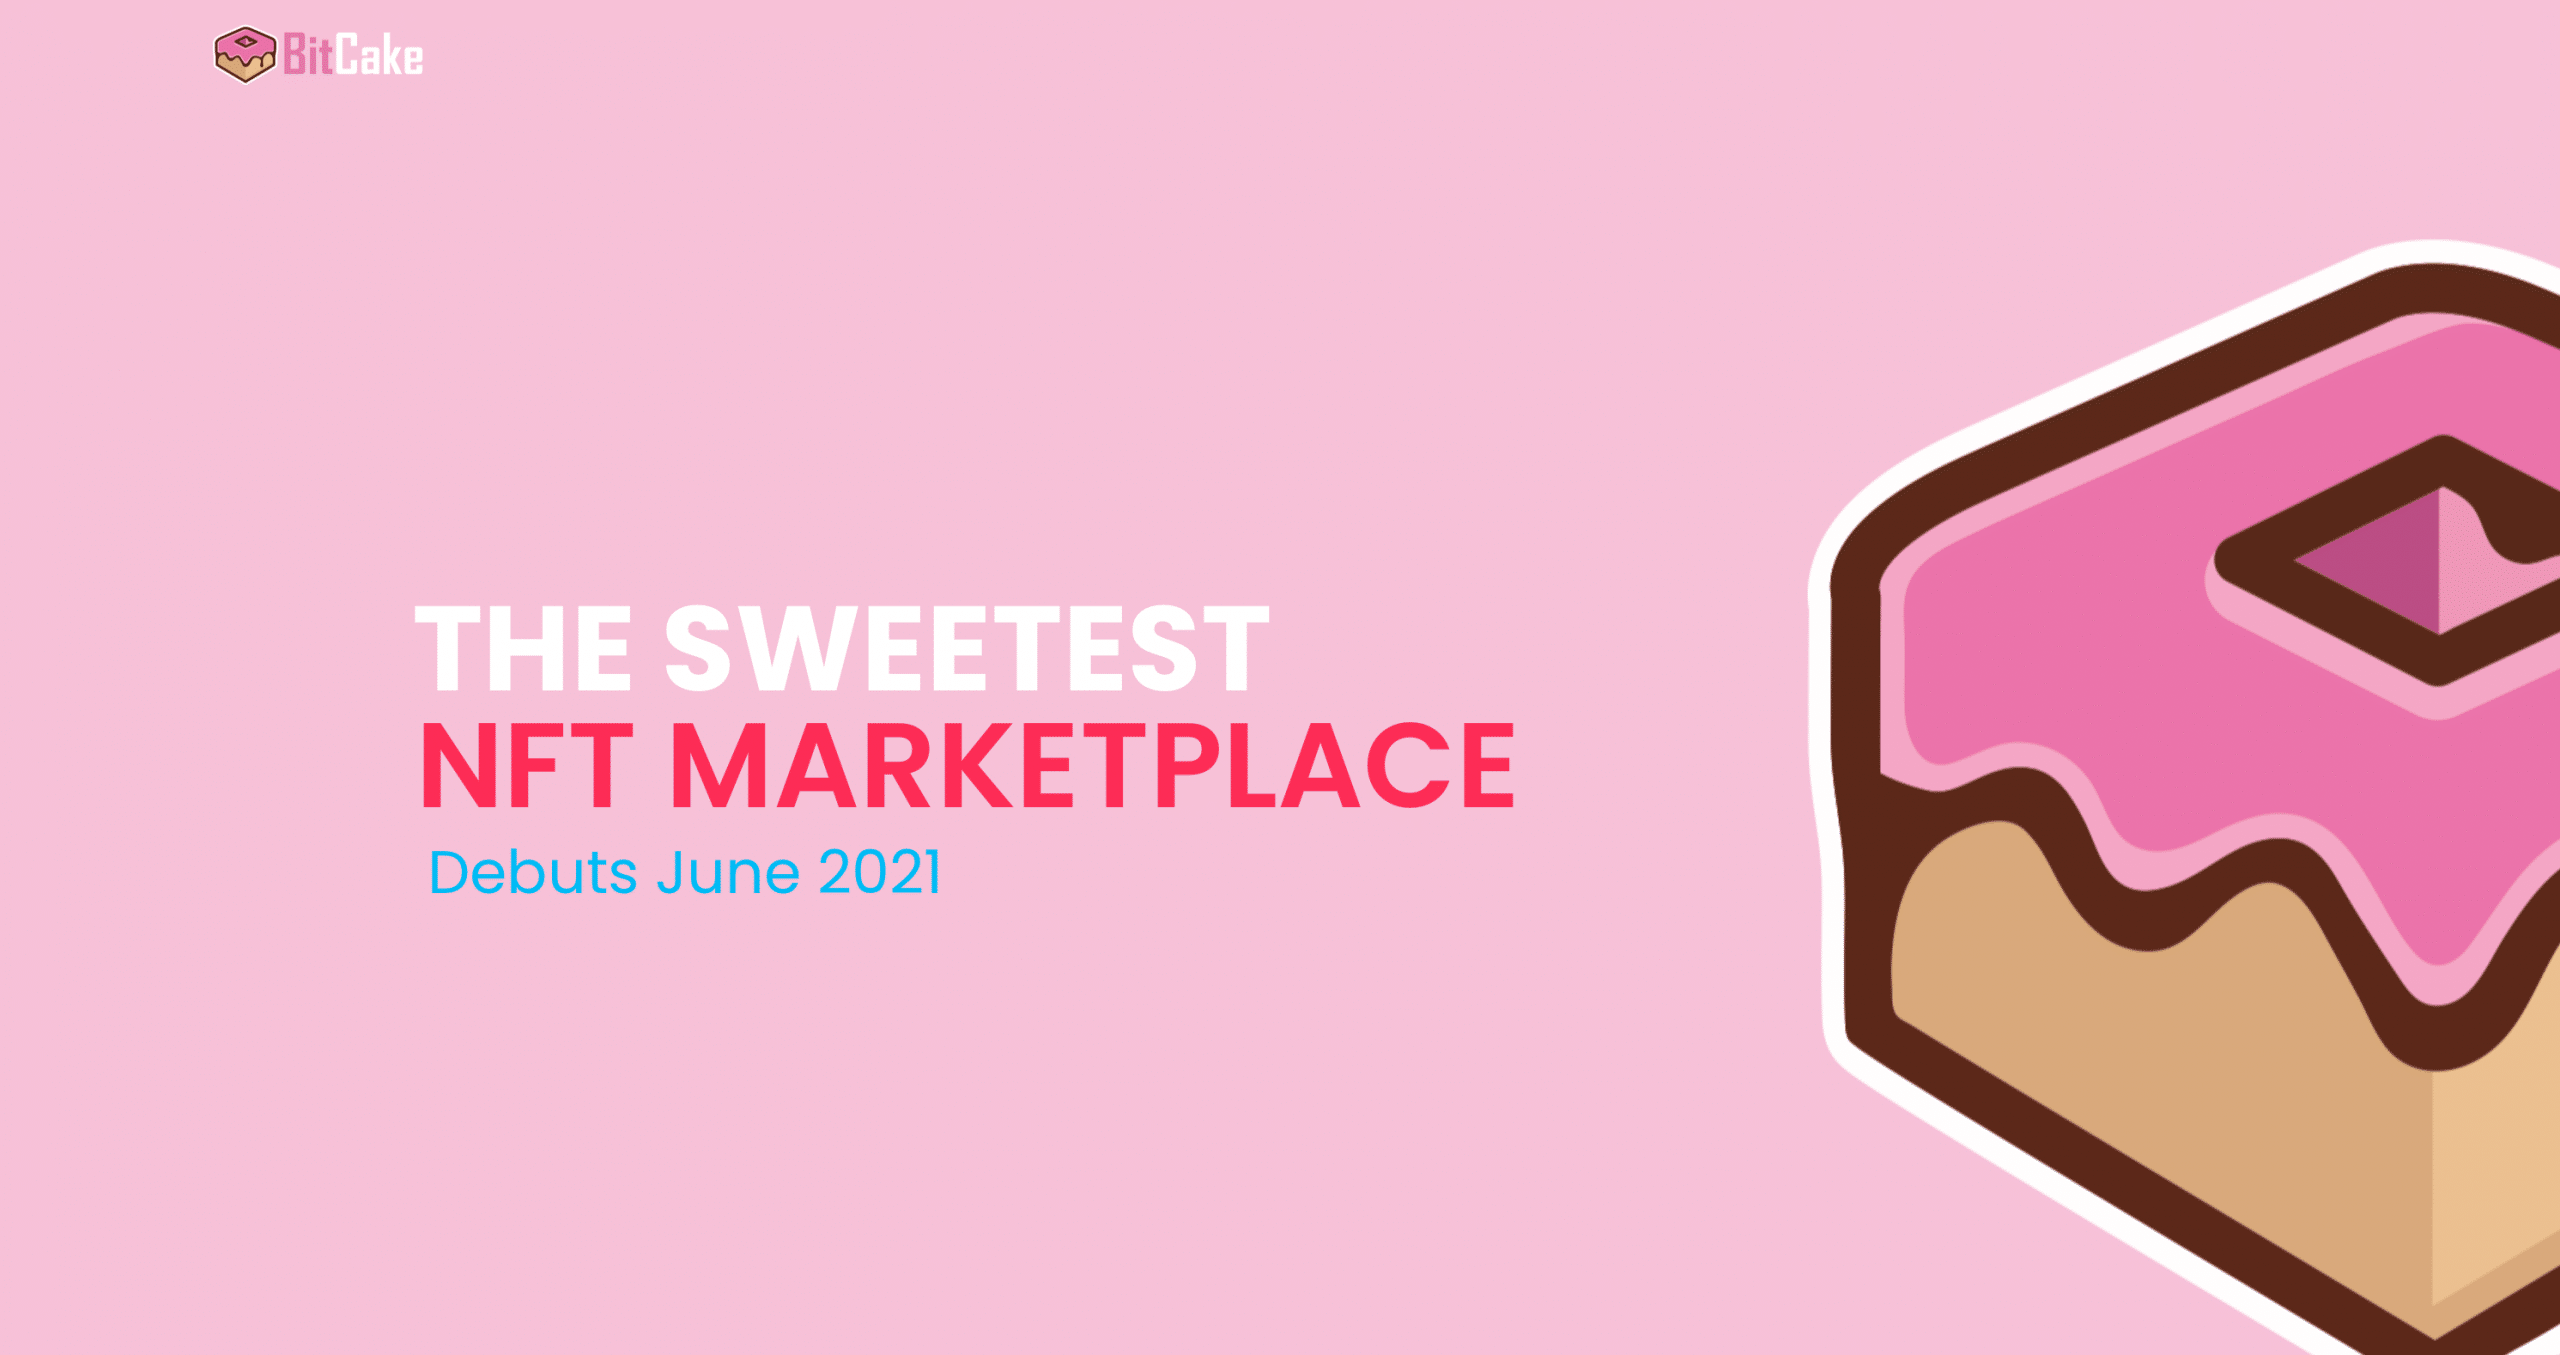 NFT site BitCake promises to be the sweetest marketplace